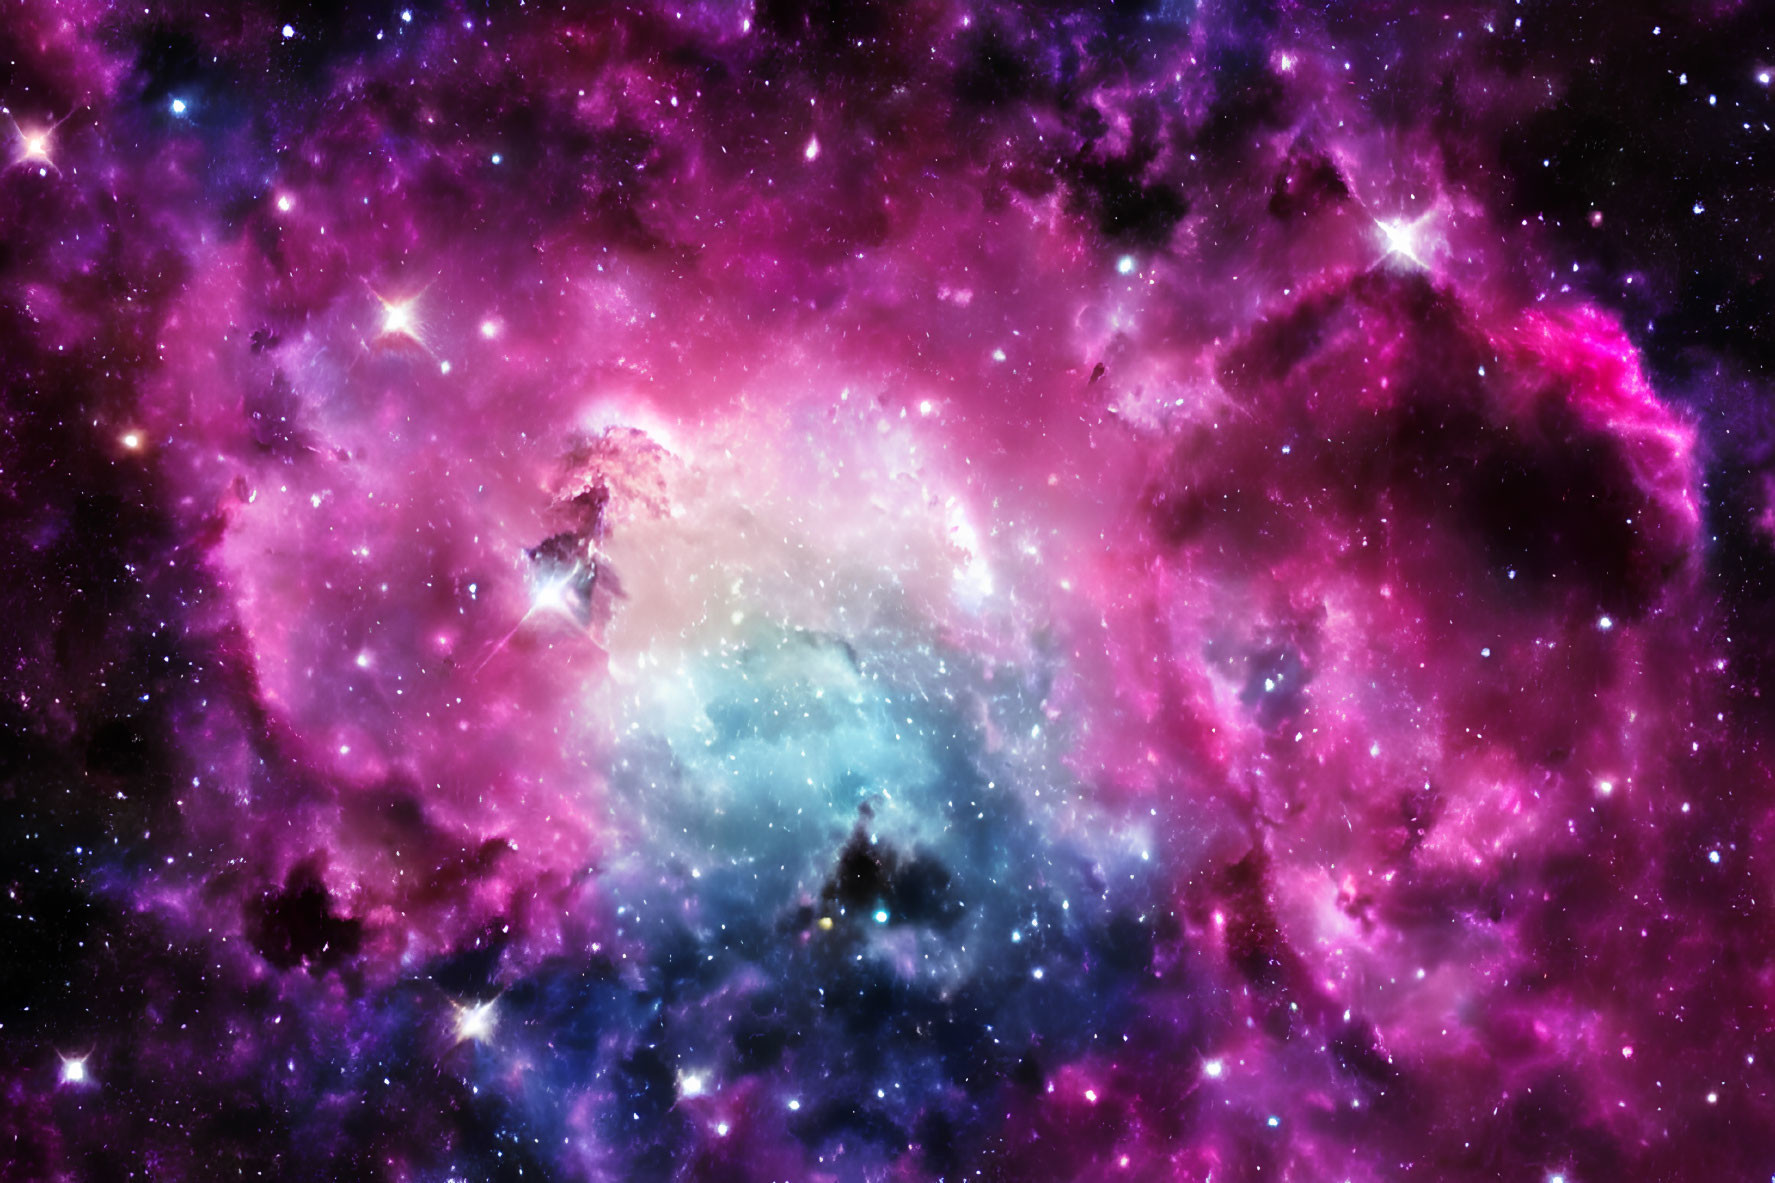 Colorful Nebula with Swirling Purple and Blue Shades